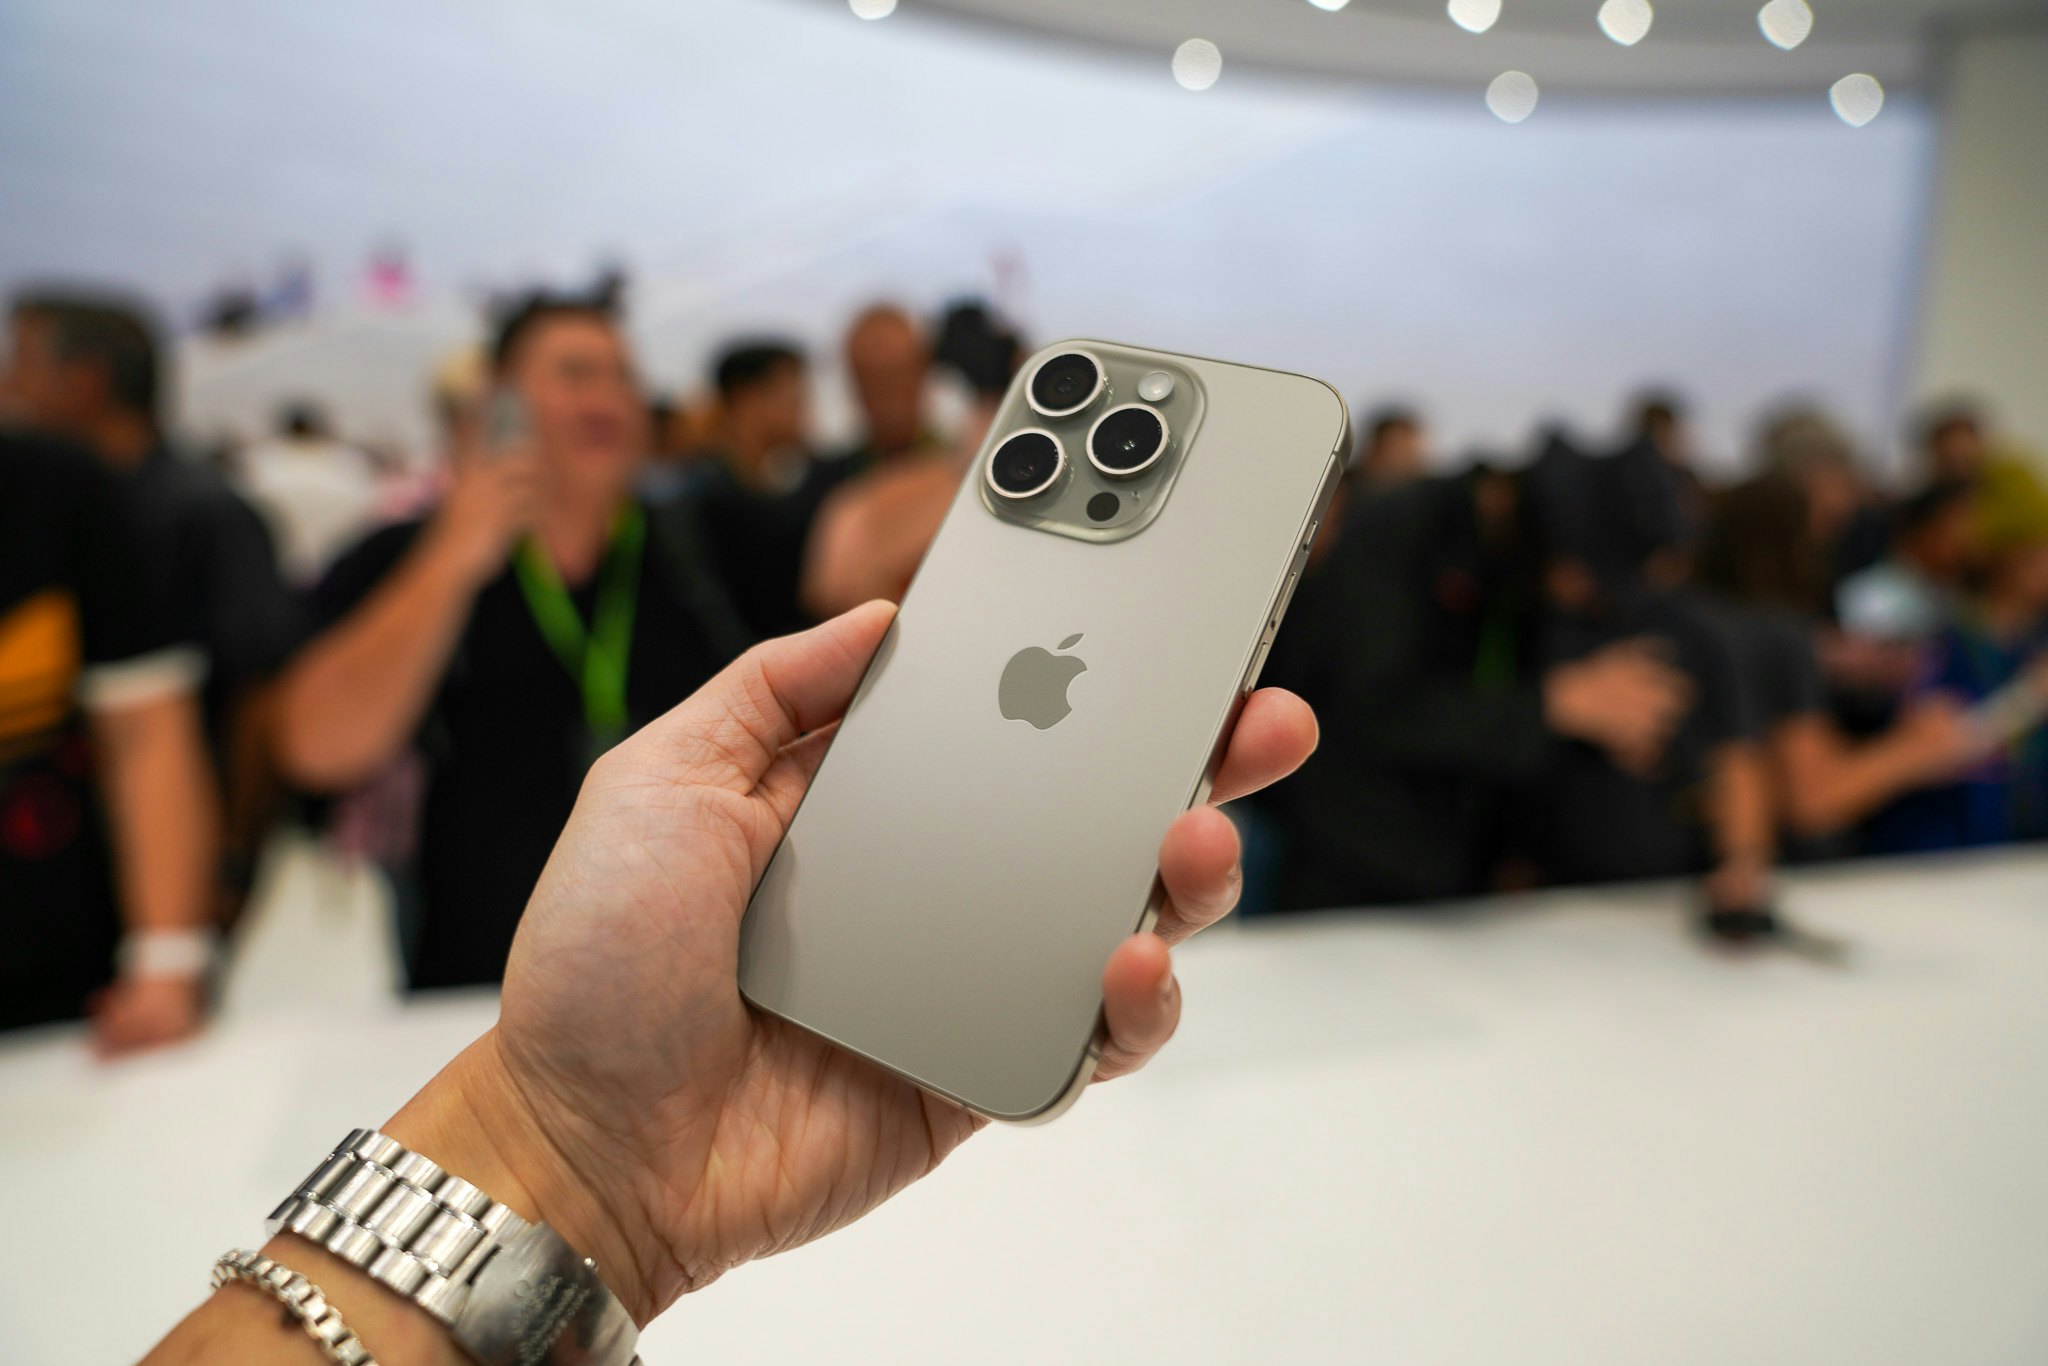 iPhone 15 launch: Apple adopts USB-C and boasts better cameras, Apple